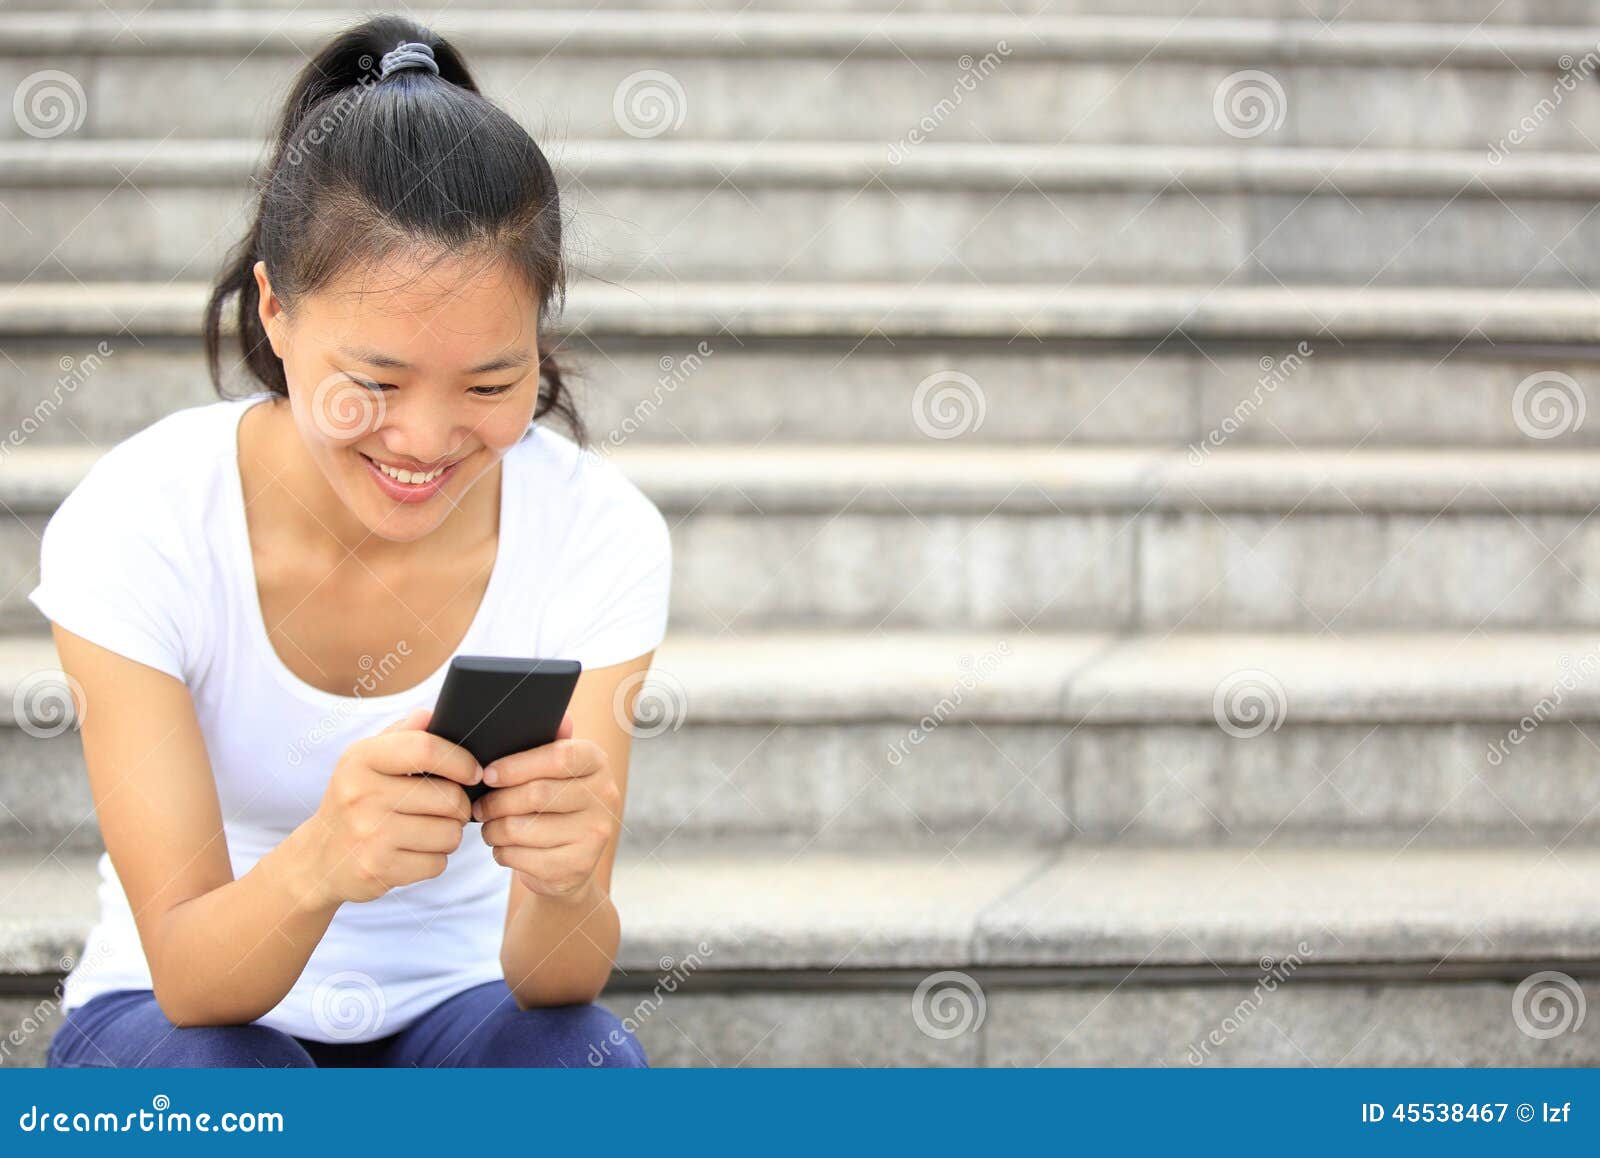 Asian Woman Use Cellphone Stock Image Image Of China 45538467